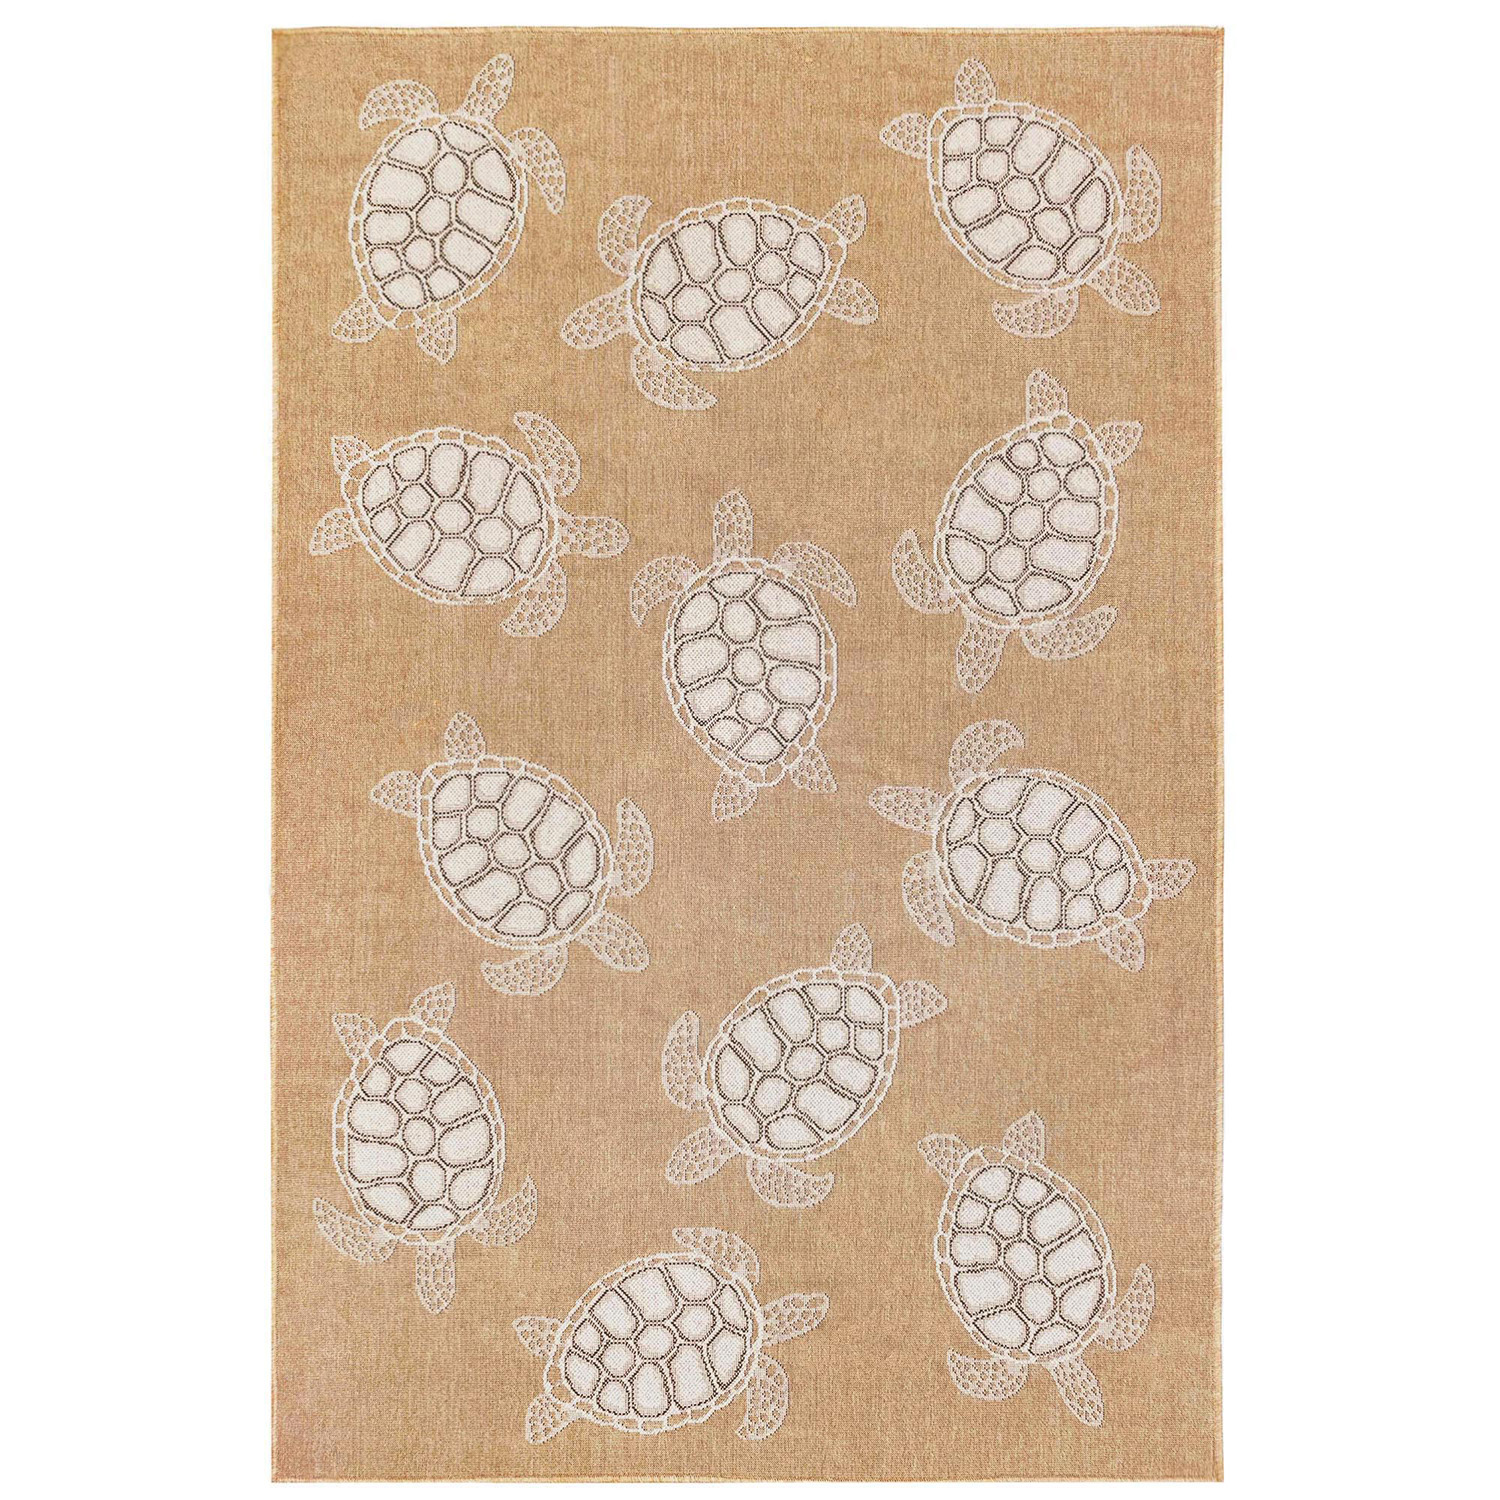 Liora Manne Carmel Low Profile  Easy Care Indoor/Outdoor Woven Rug- Seaturtles Sand  Product Image